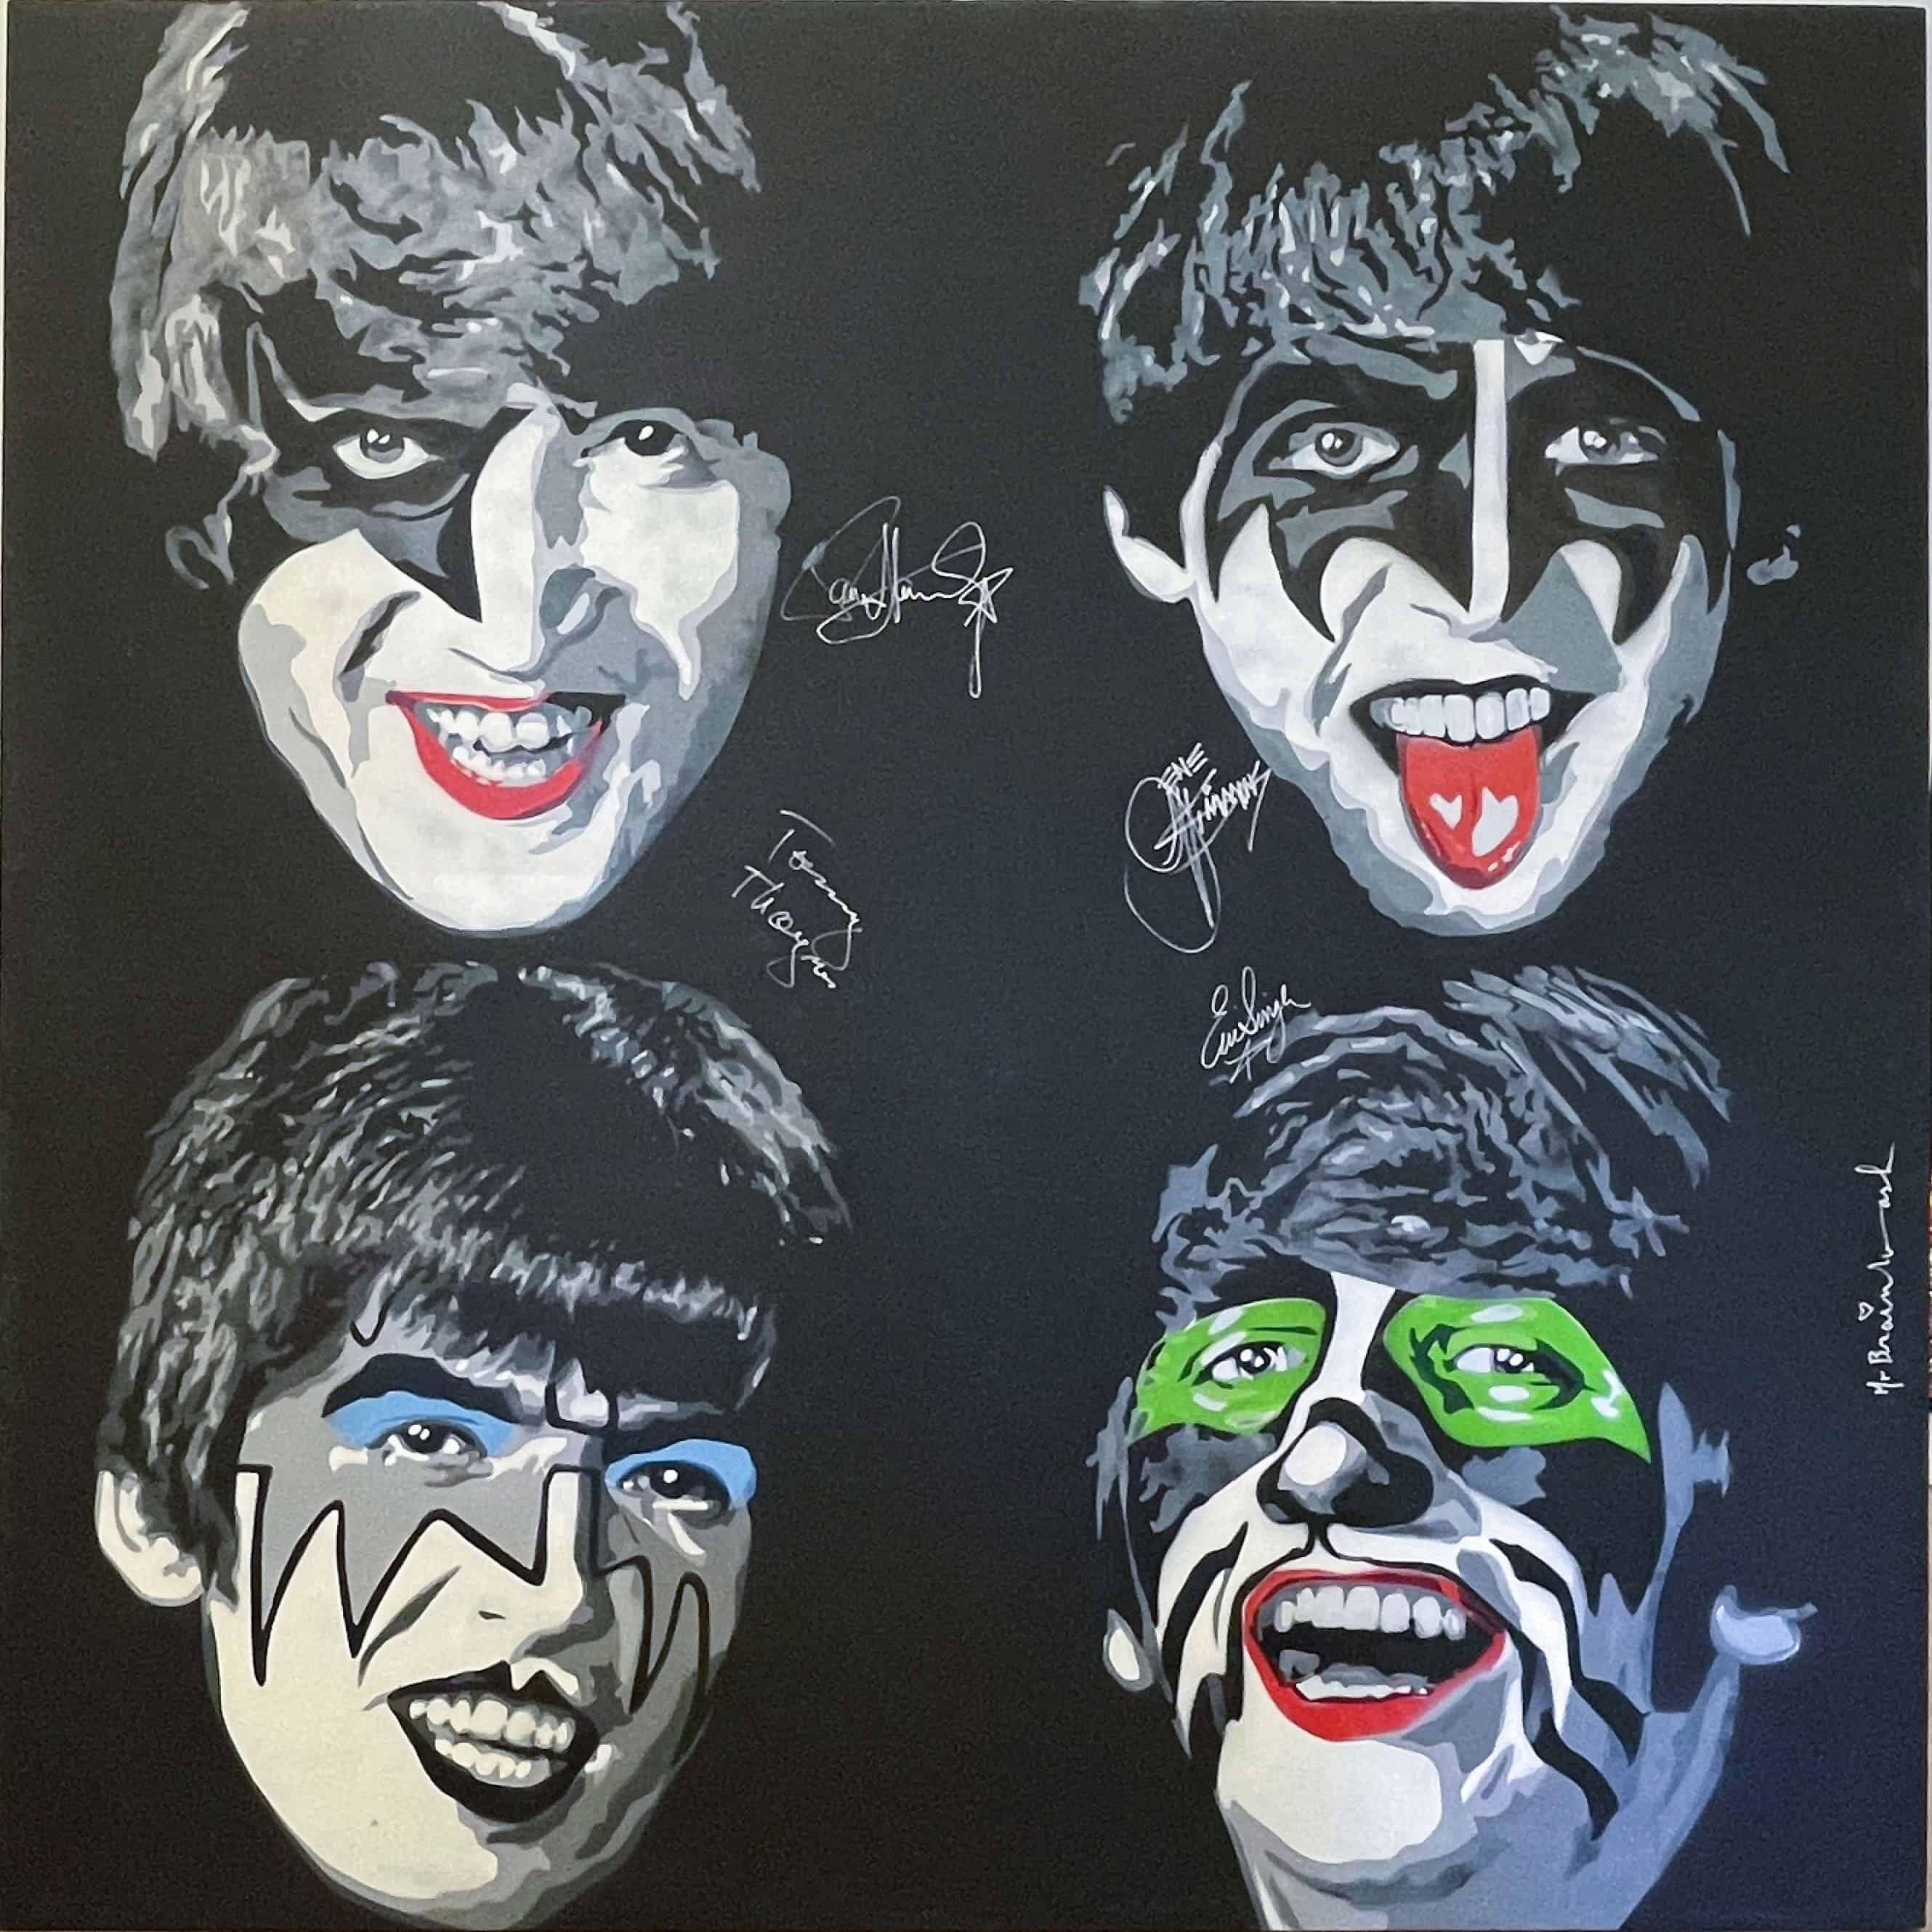 Pop Art. Title: Kiss the Beatles_Acrylic on Canvas_2009_84 x 84 in by Mr. Brainwash.